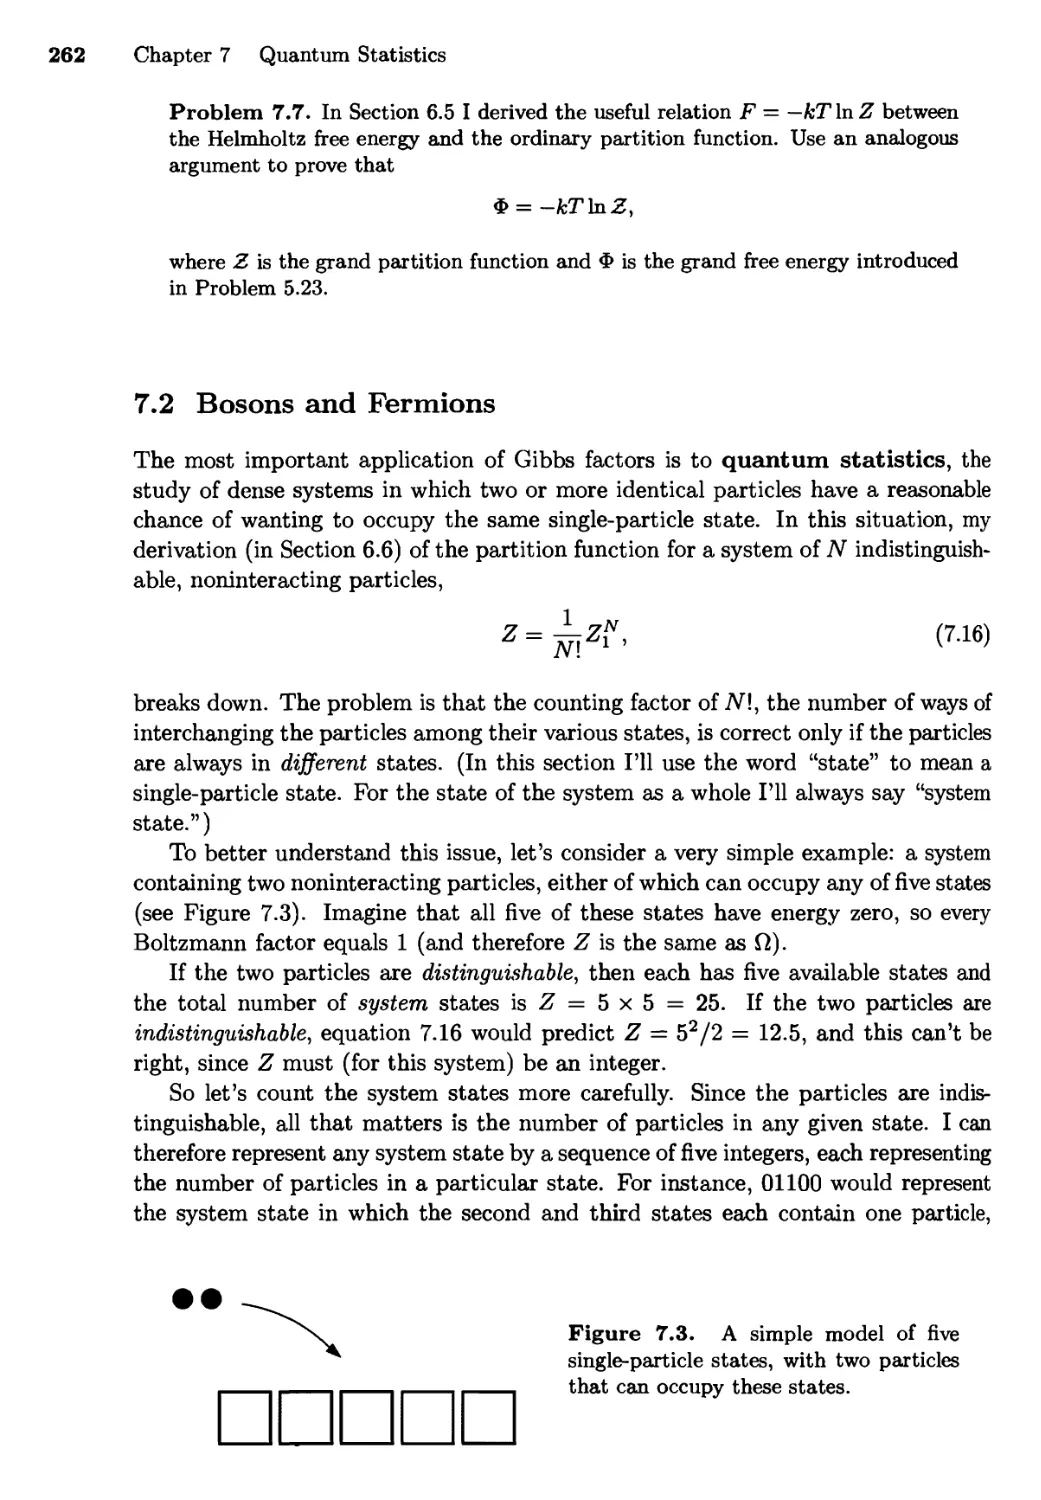 7.2 Bosons and Fermions